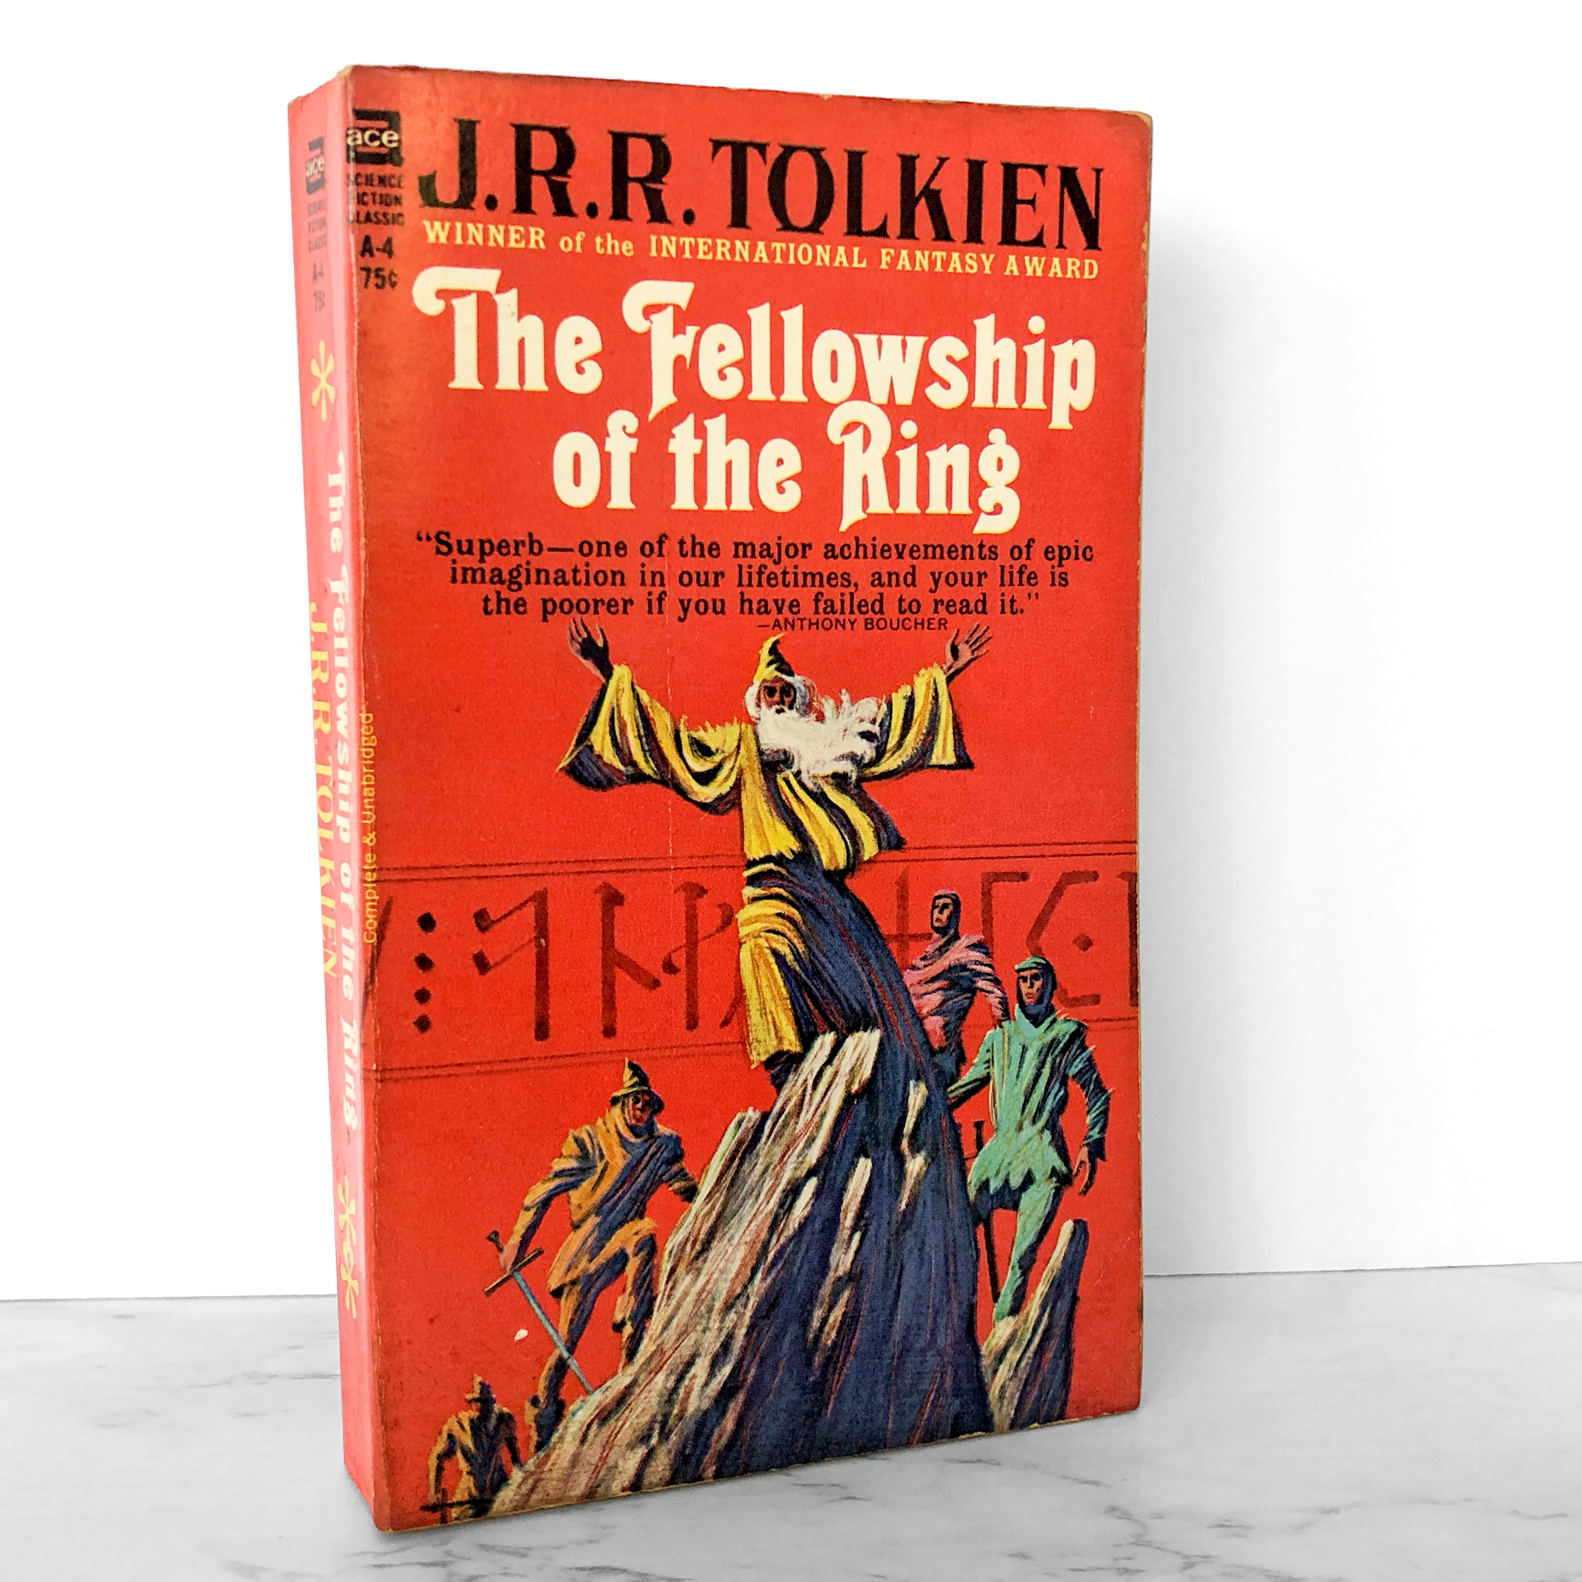 The Fellowship of the Ring by J. R. R. Tolkien